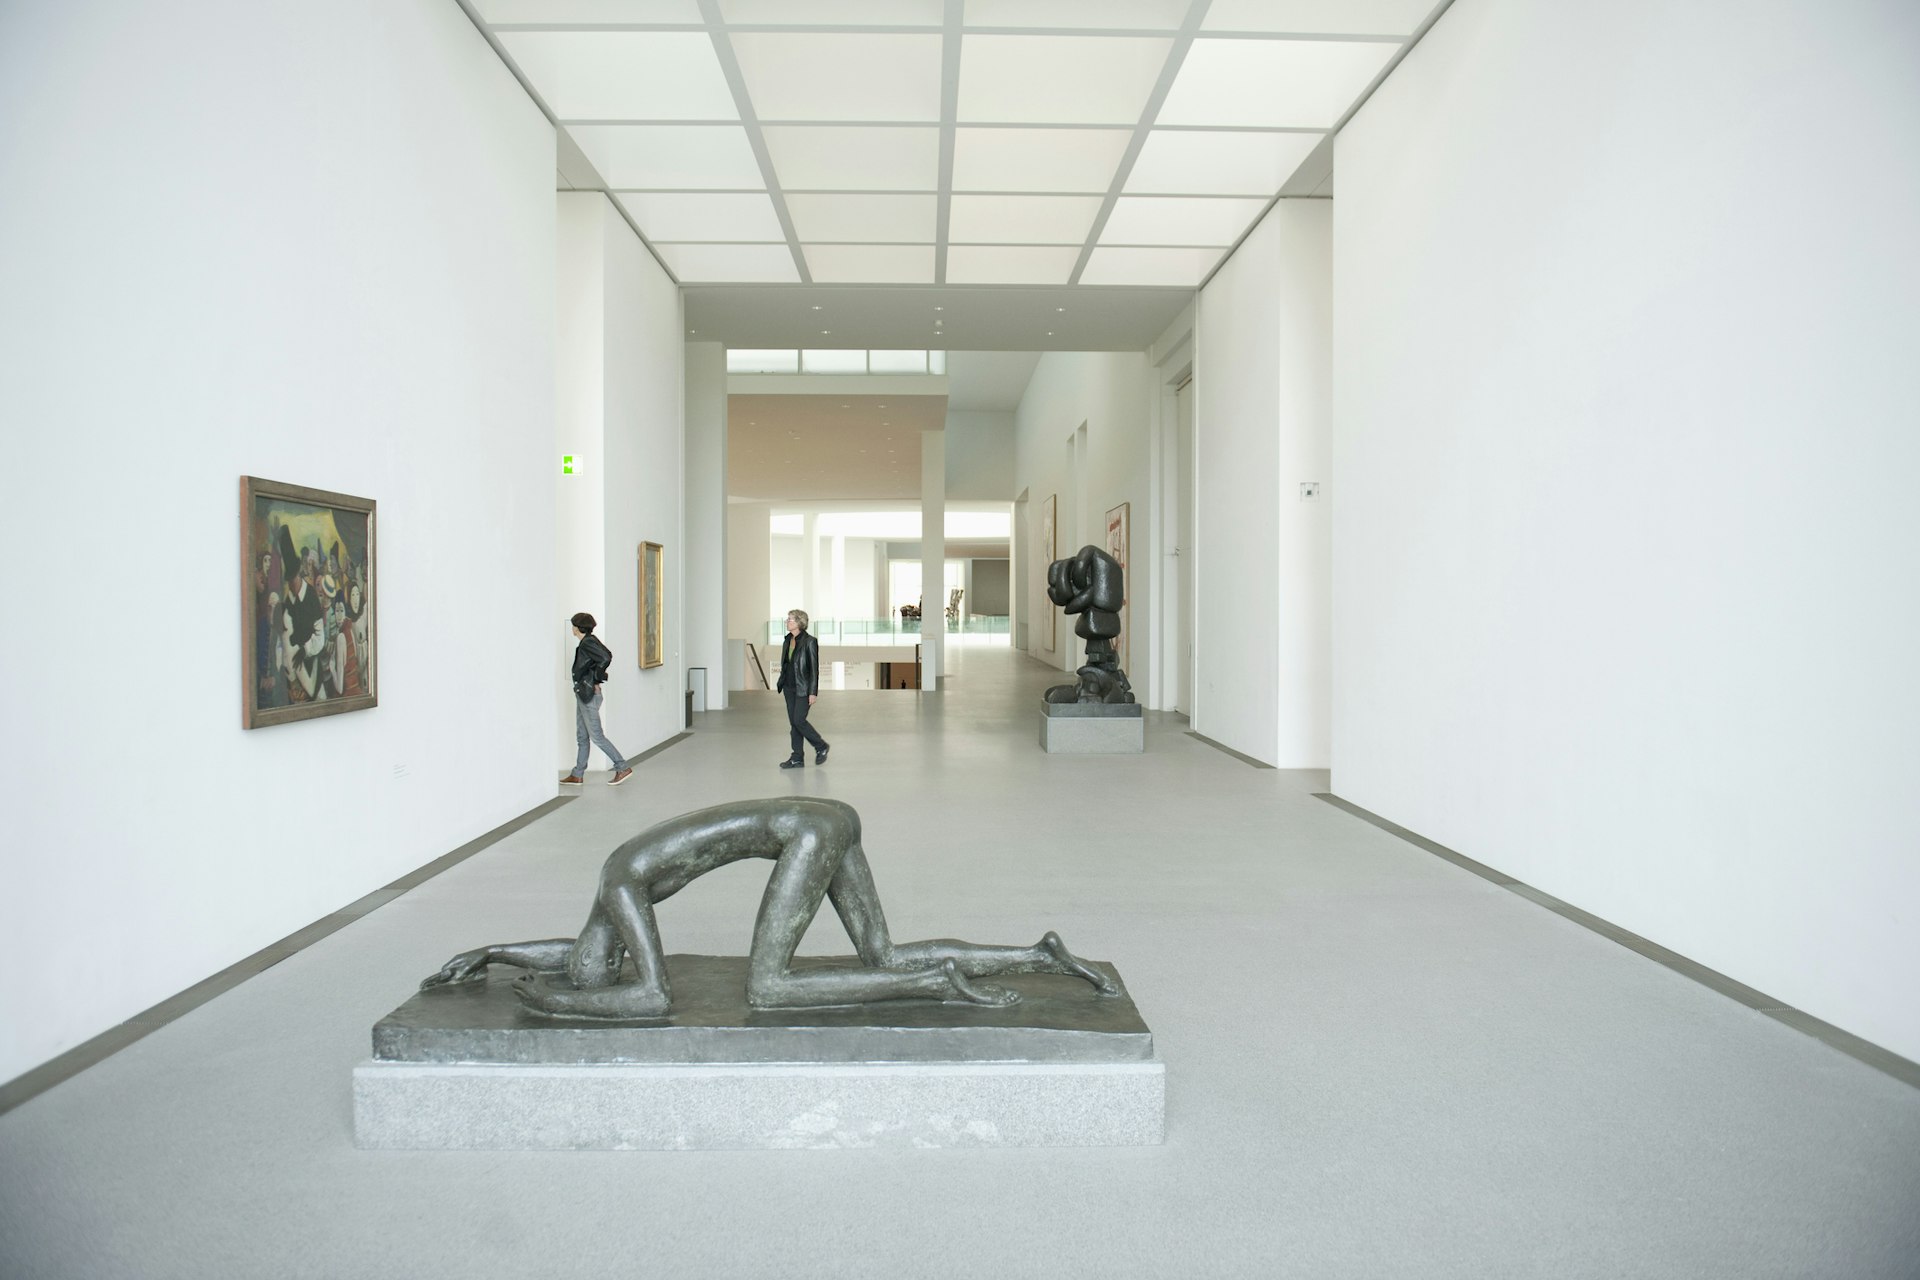 A large hall in an art gallery, with several free-standing sculptures based on the human form. Two people are walking through the exhibition space